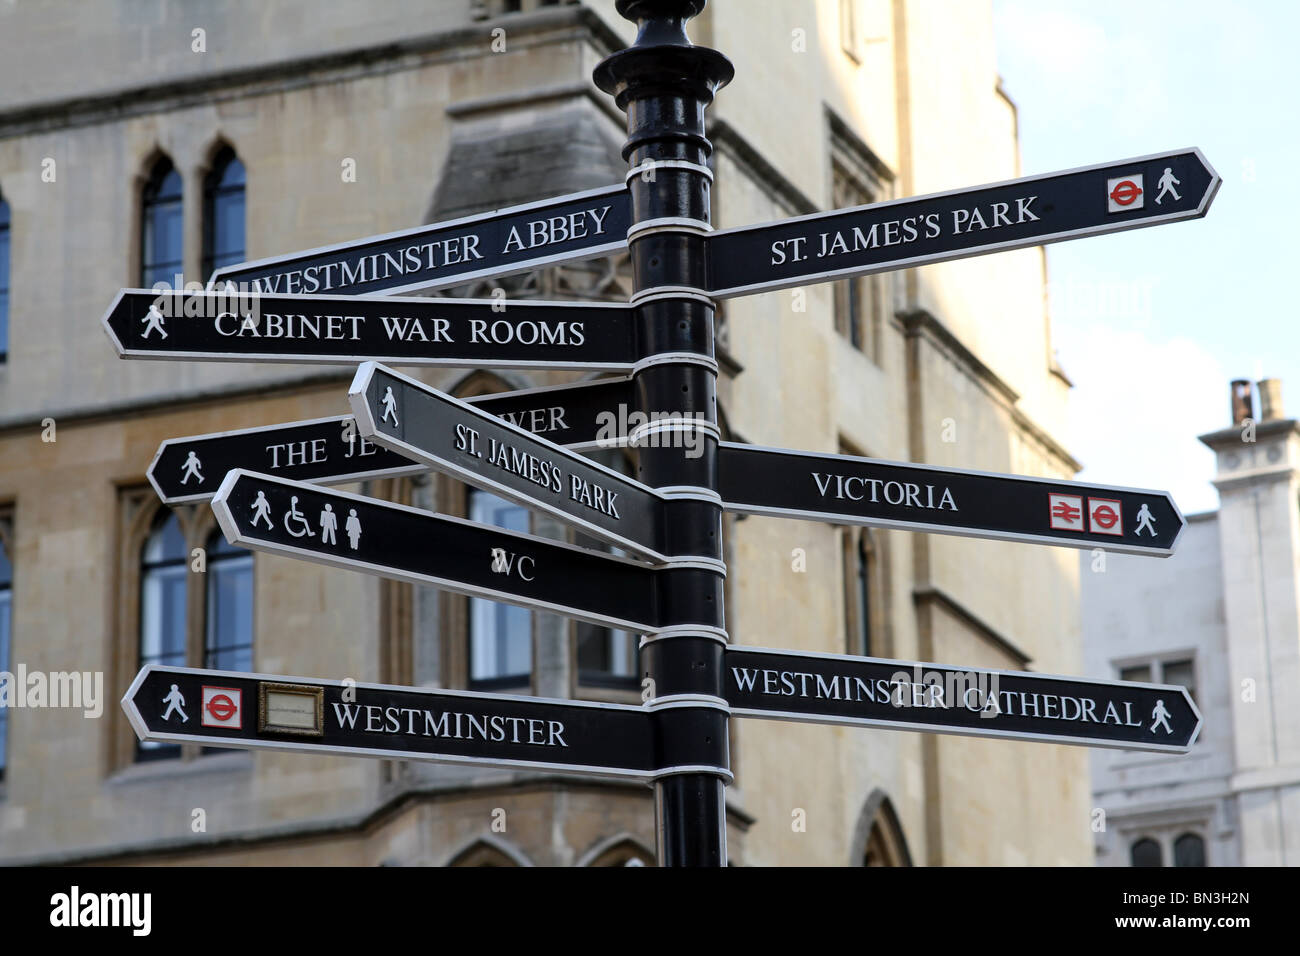 London tourist attraction signpost with direction signs in London, England Stock Photo